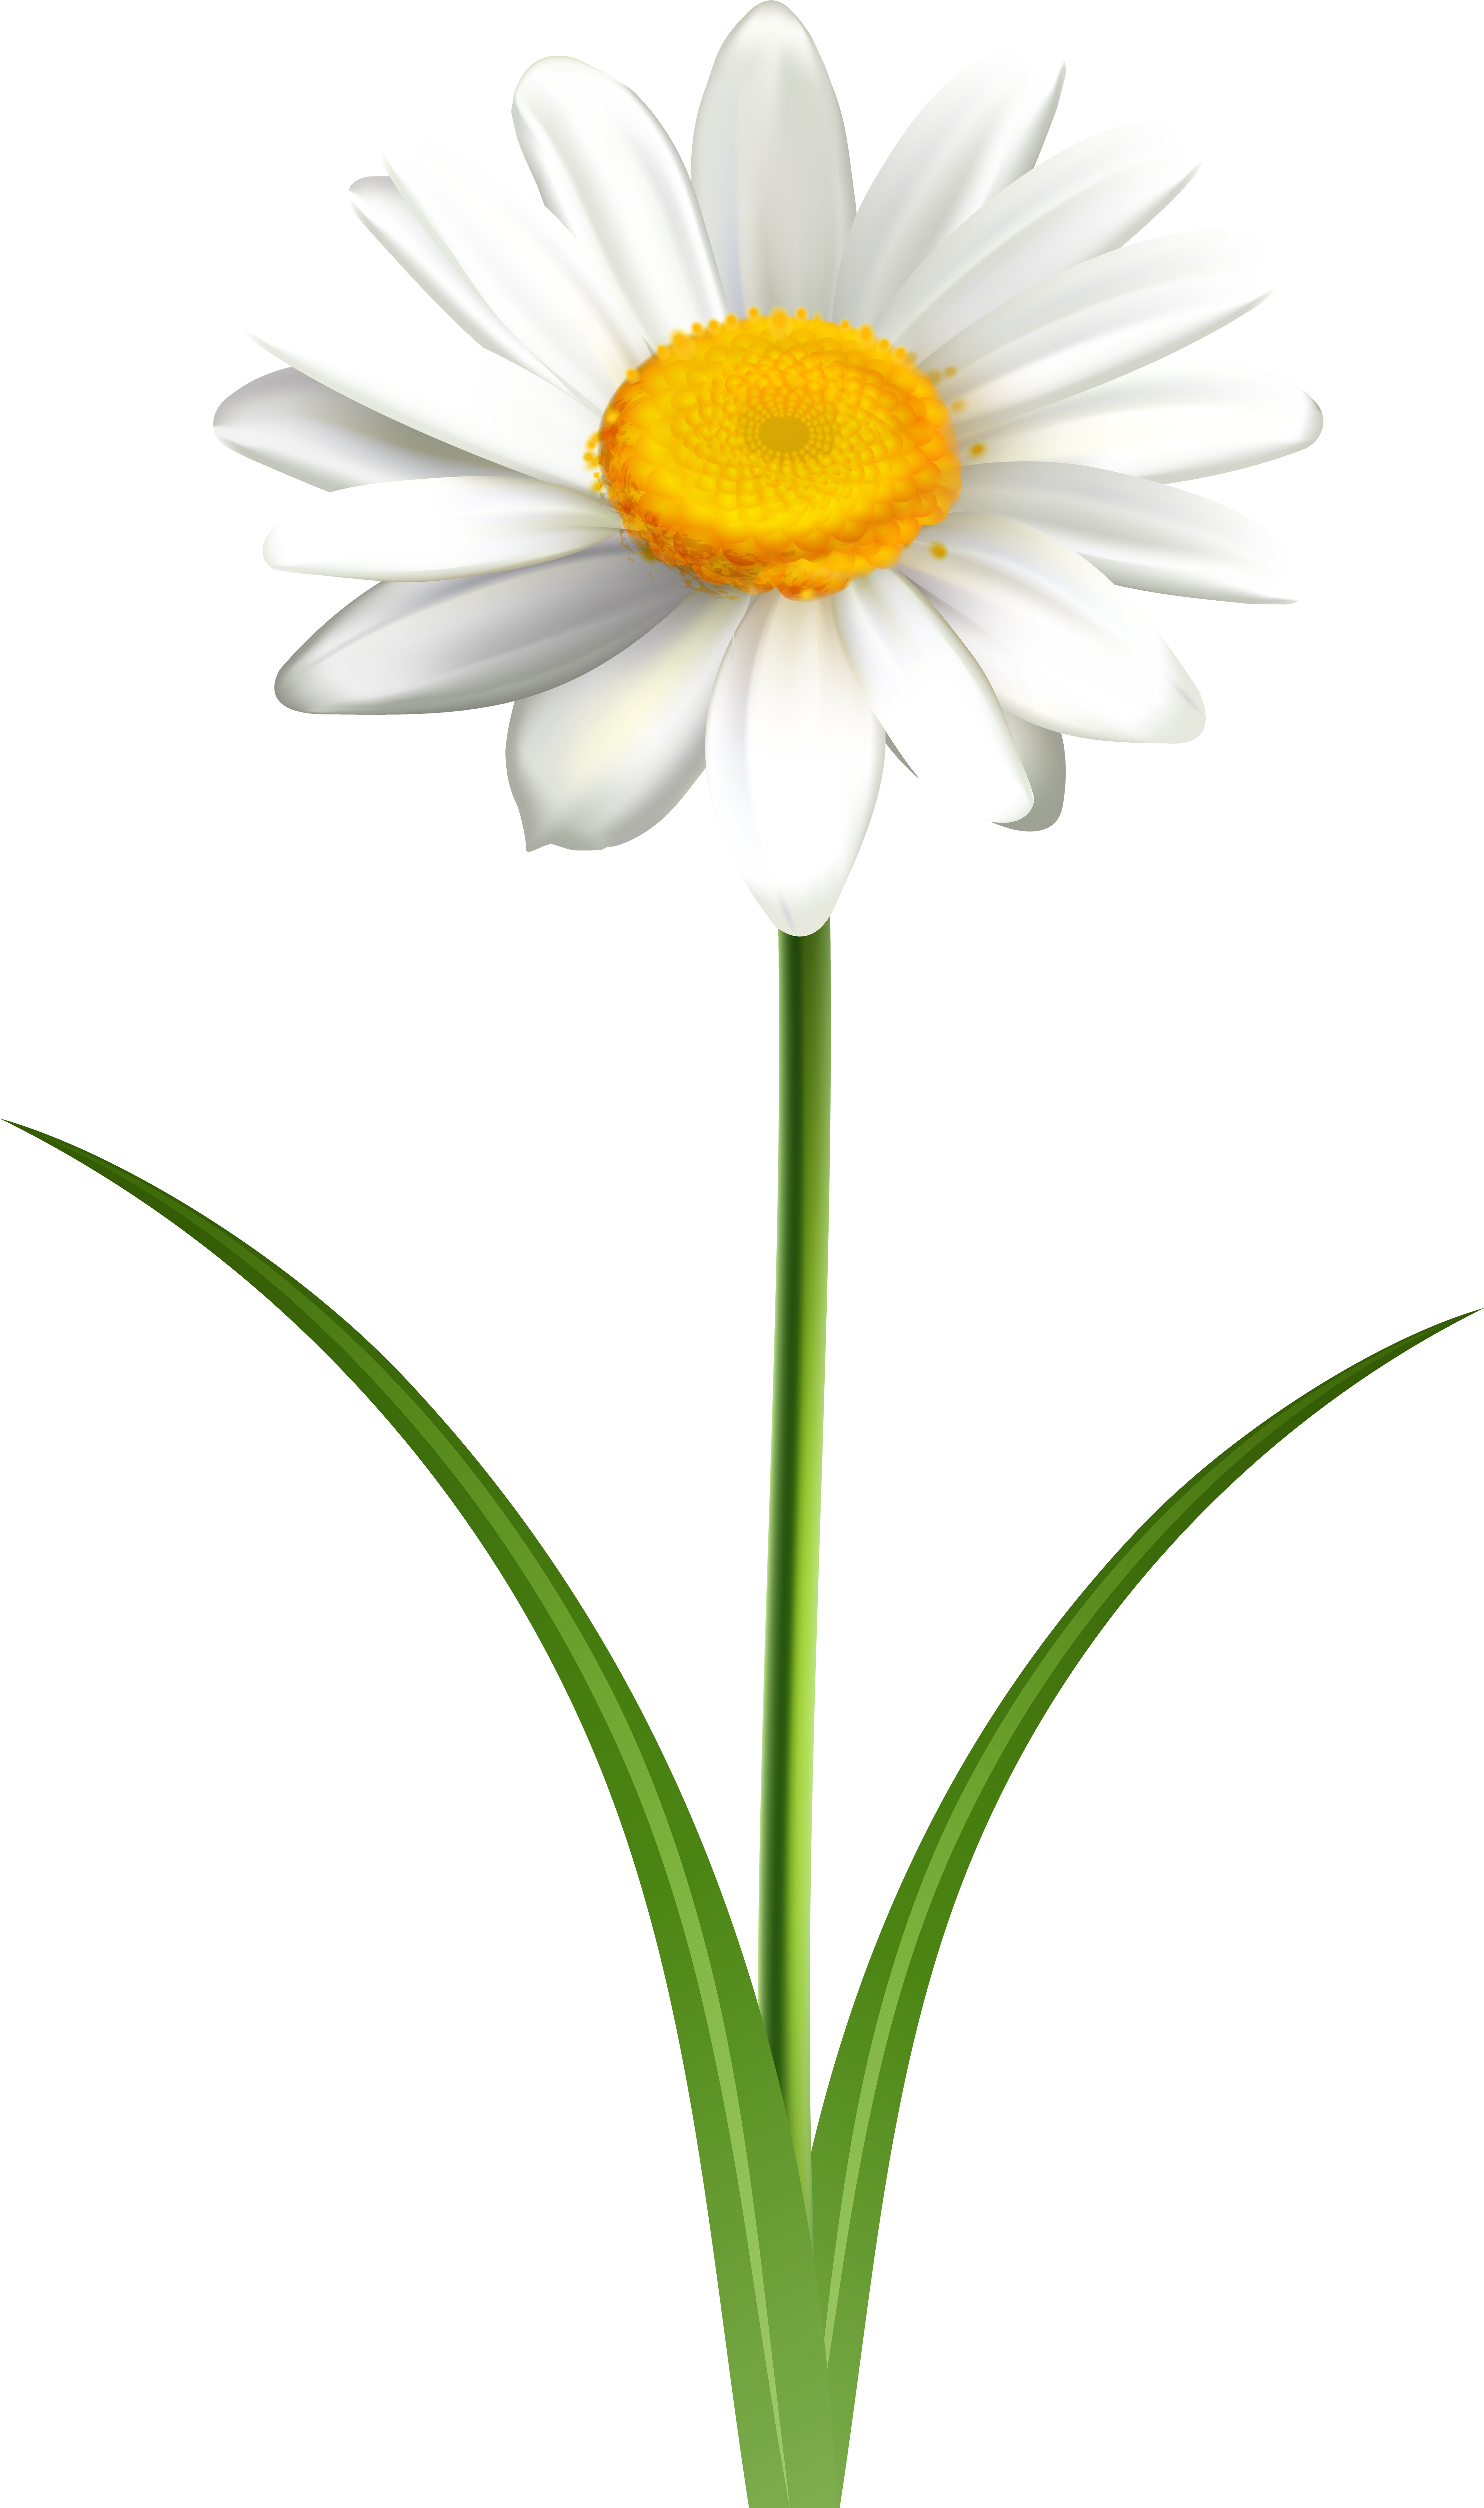 A White And Yellow Flower With Green Stems